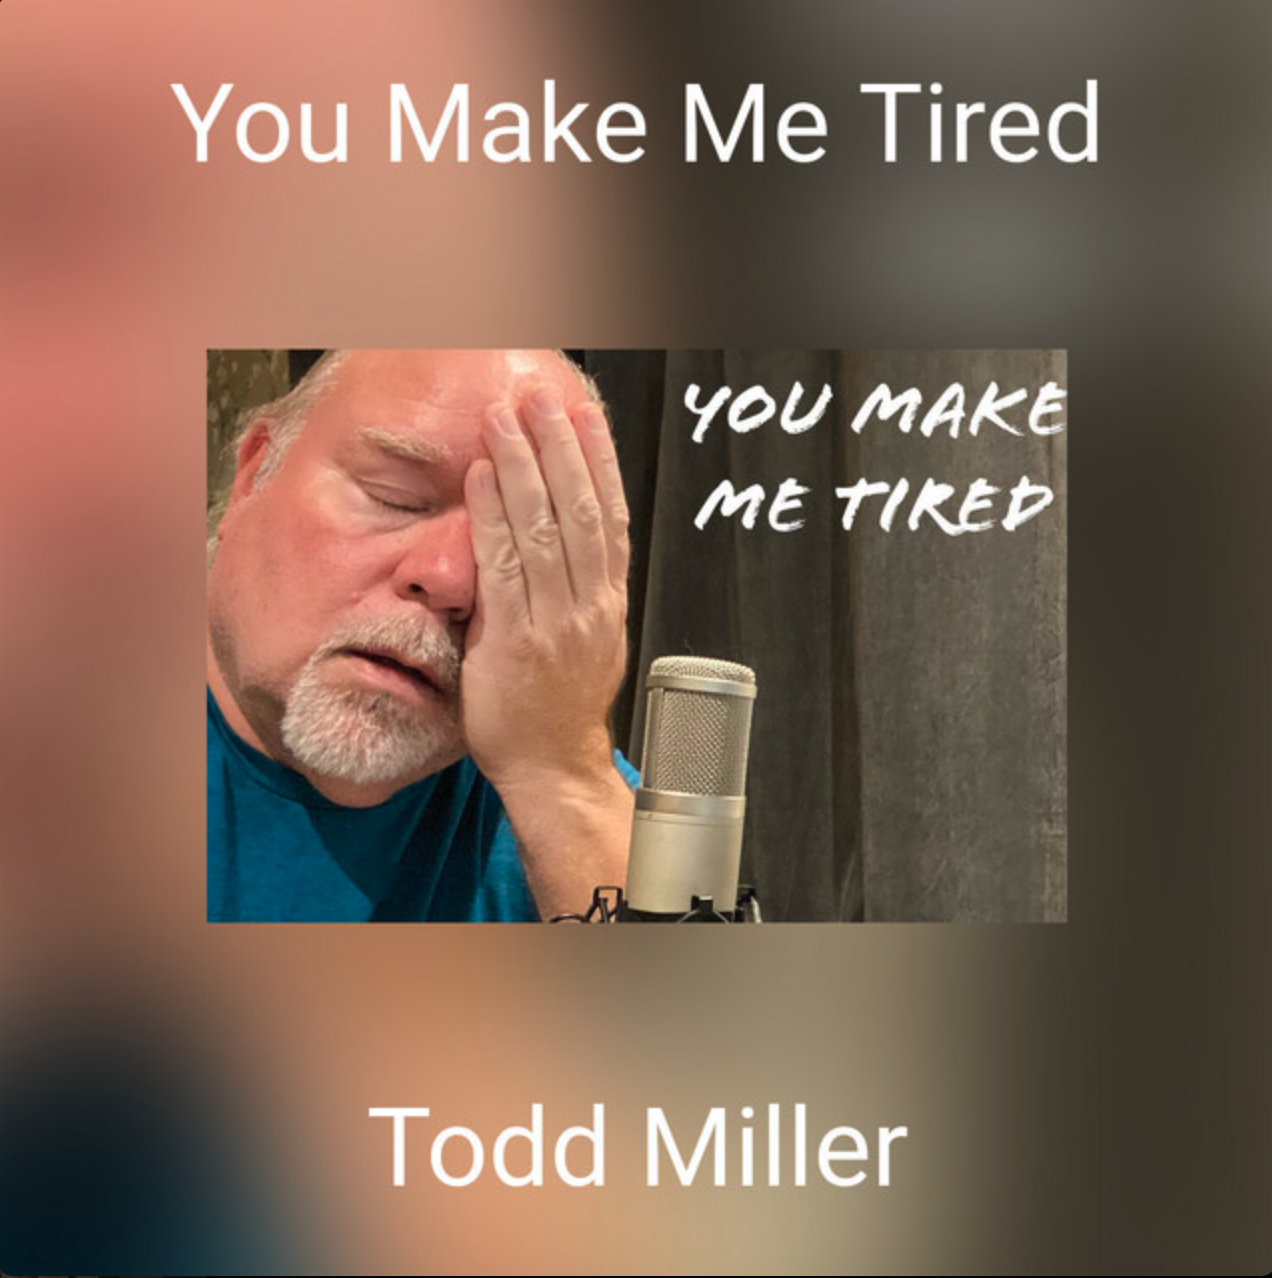 “You Make Me Tired” released on all streaming services!